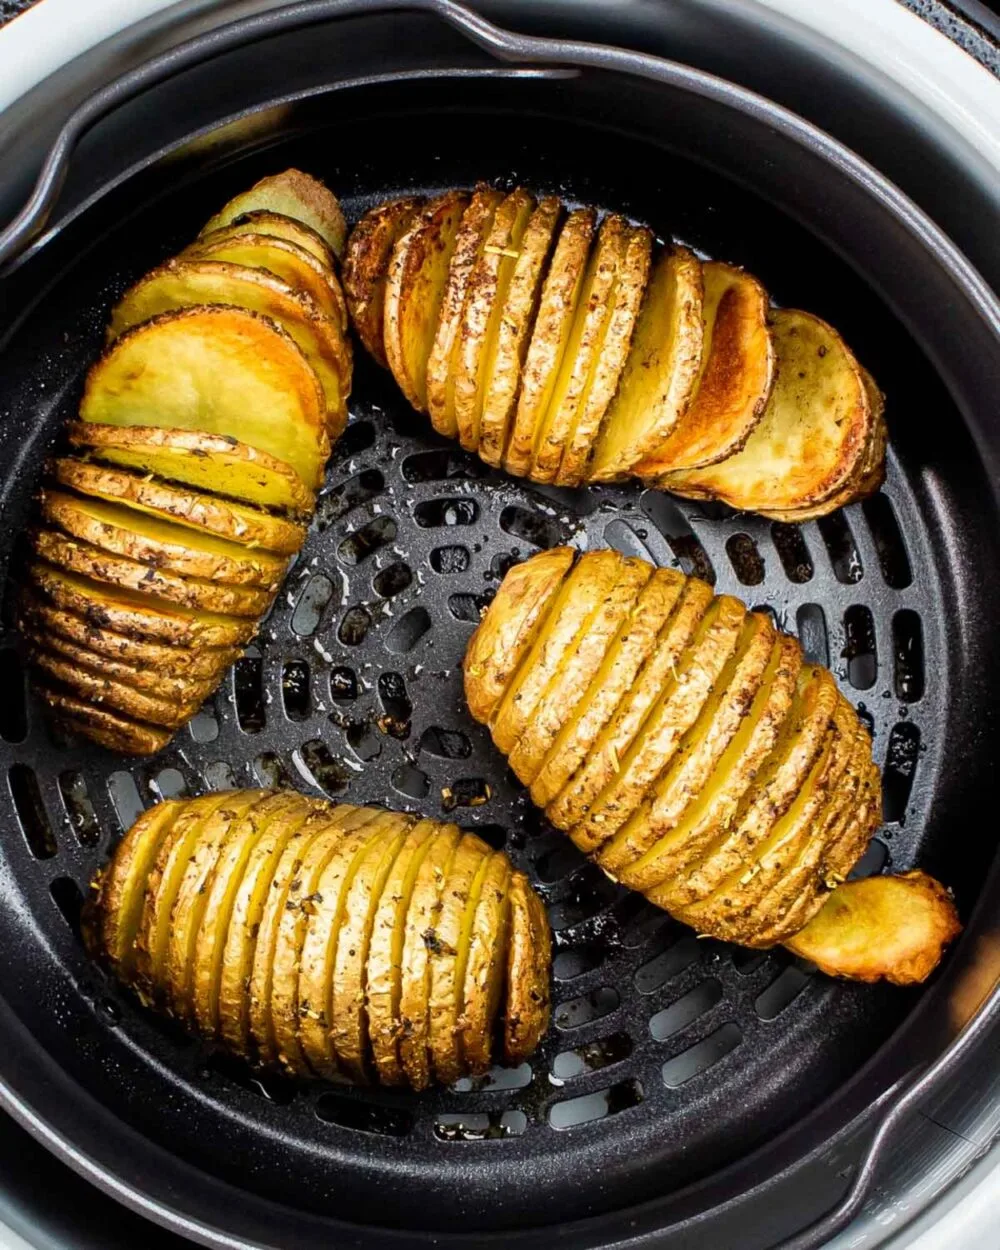 Sliced potatoes in the air fryer